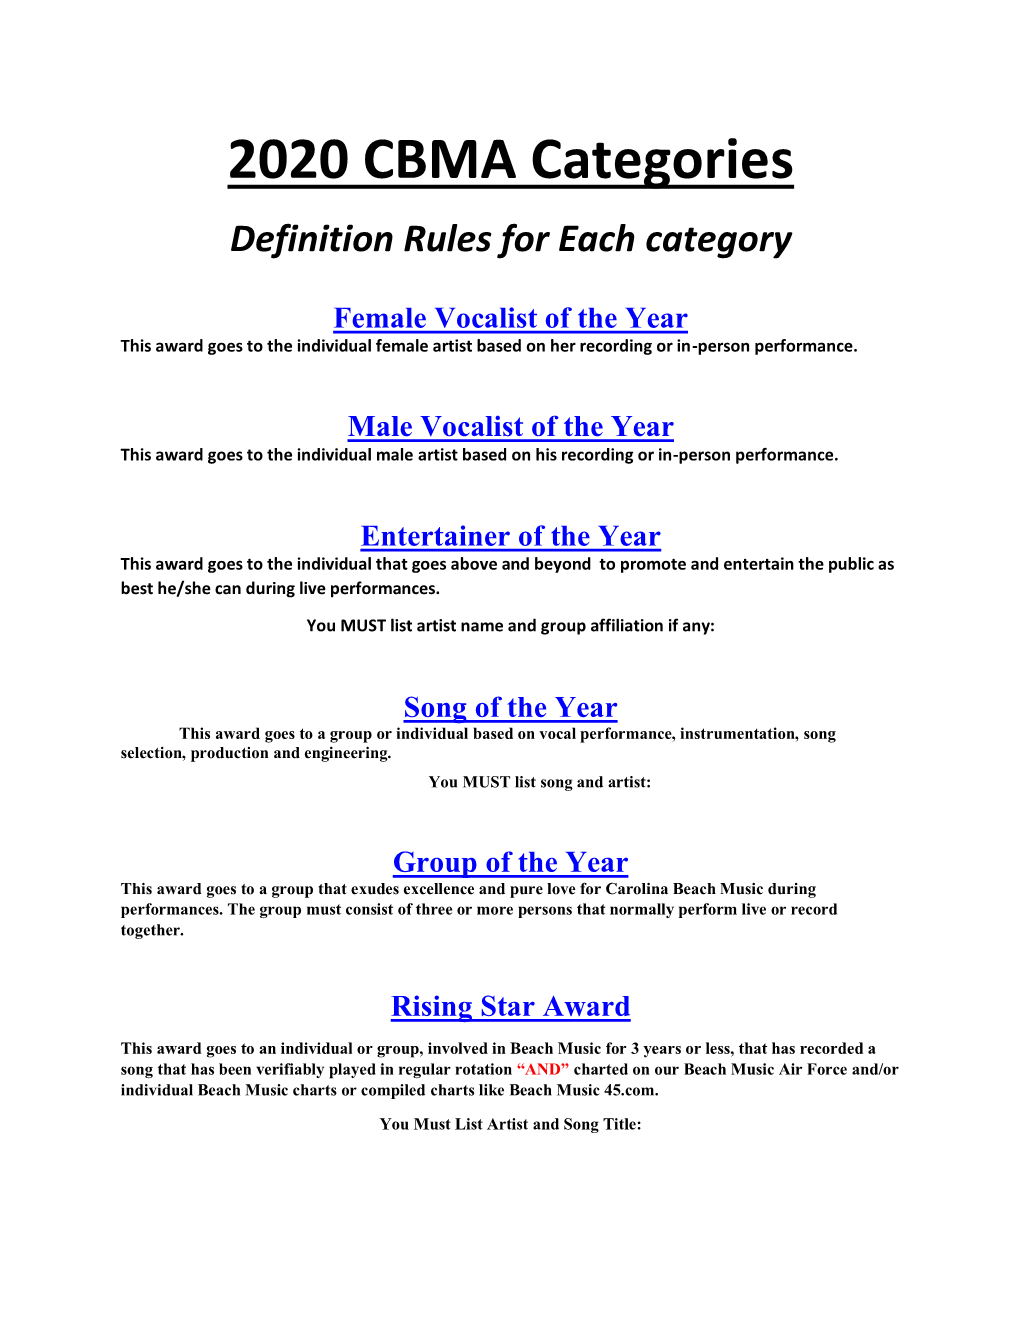 FM Radio Station This Award Goes to the FM Radio Station That Has Or Is Providing Airplay of Carolina Beach Music in a Regular Rotation Or with Specialty Programming